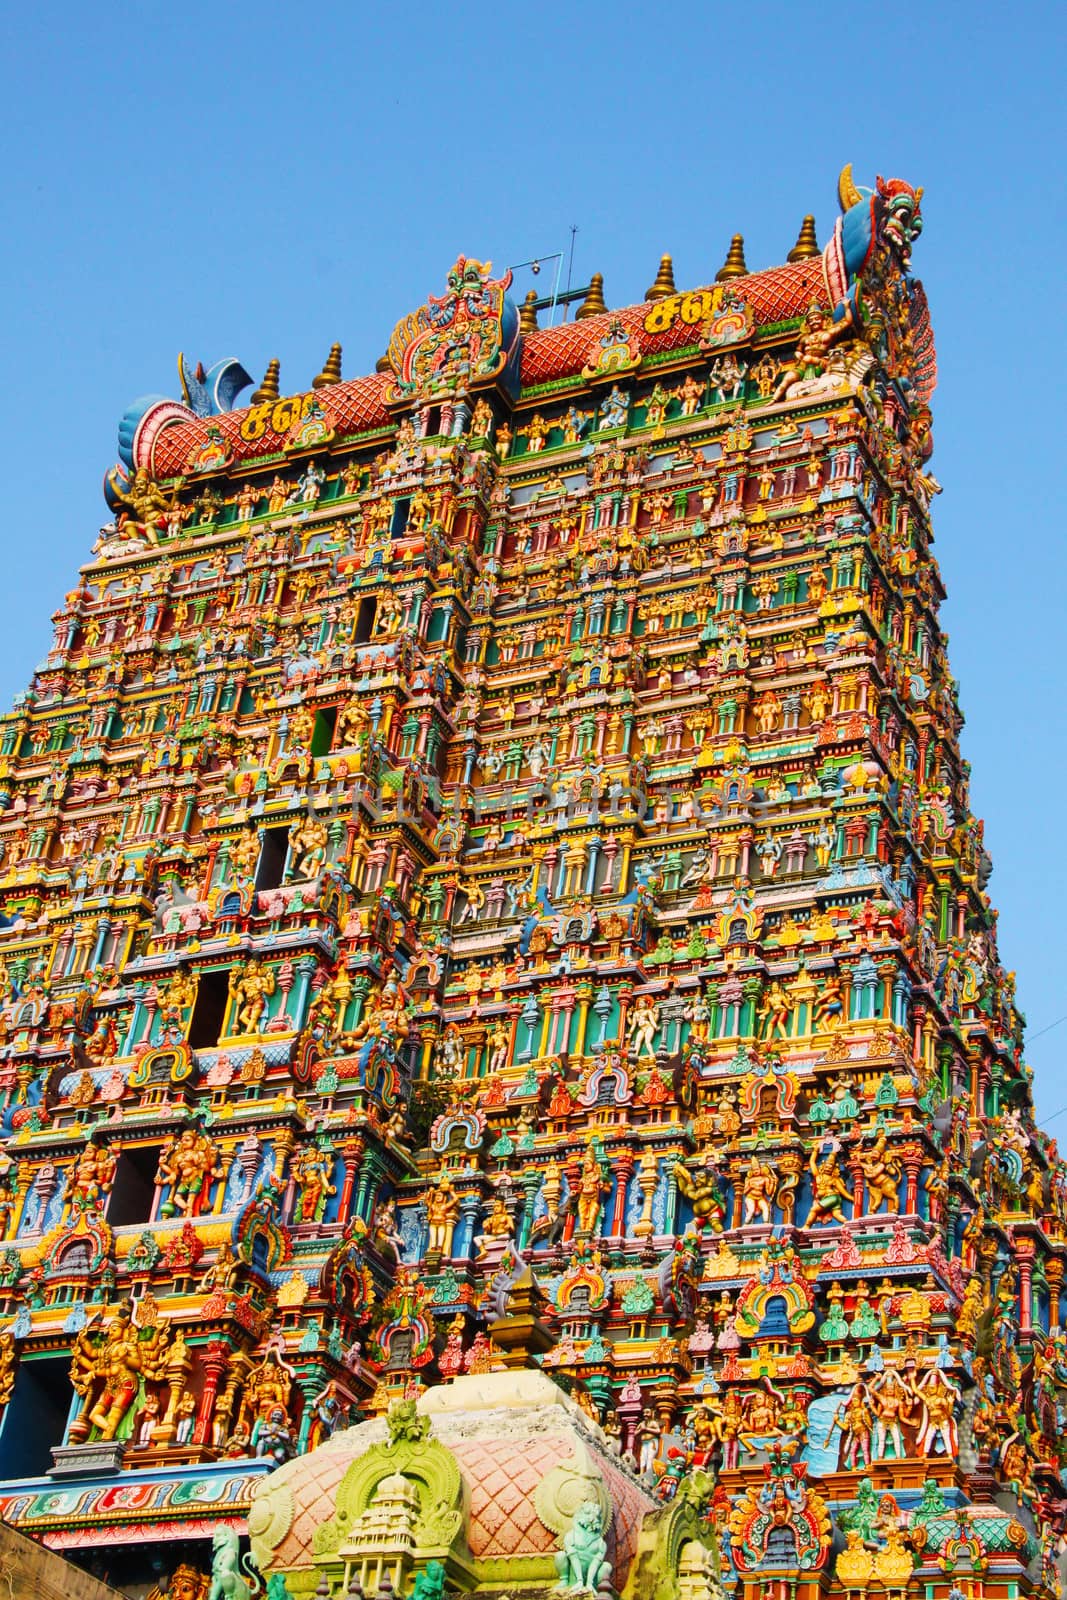 Meenakshi Amman Kovil is a historic Hindu temple located in the southern bank of river Vaigai in the city of Madurai, Tamil Nadu, India.